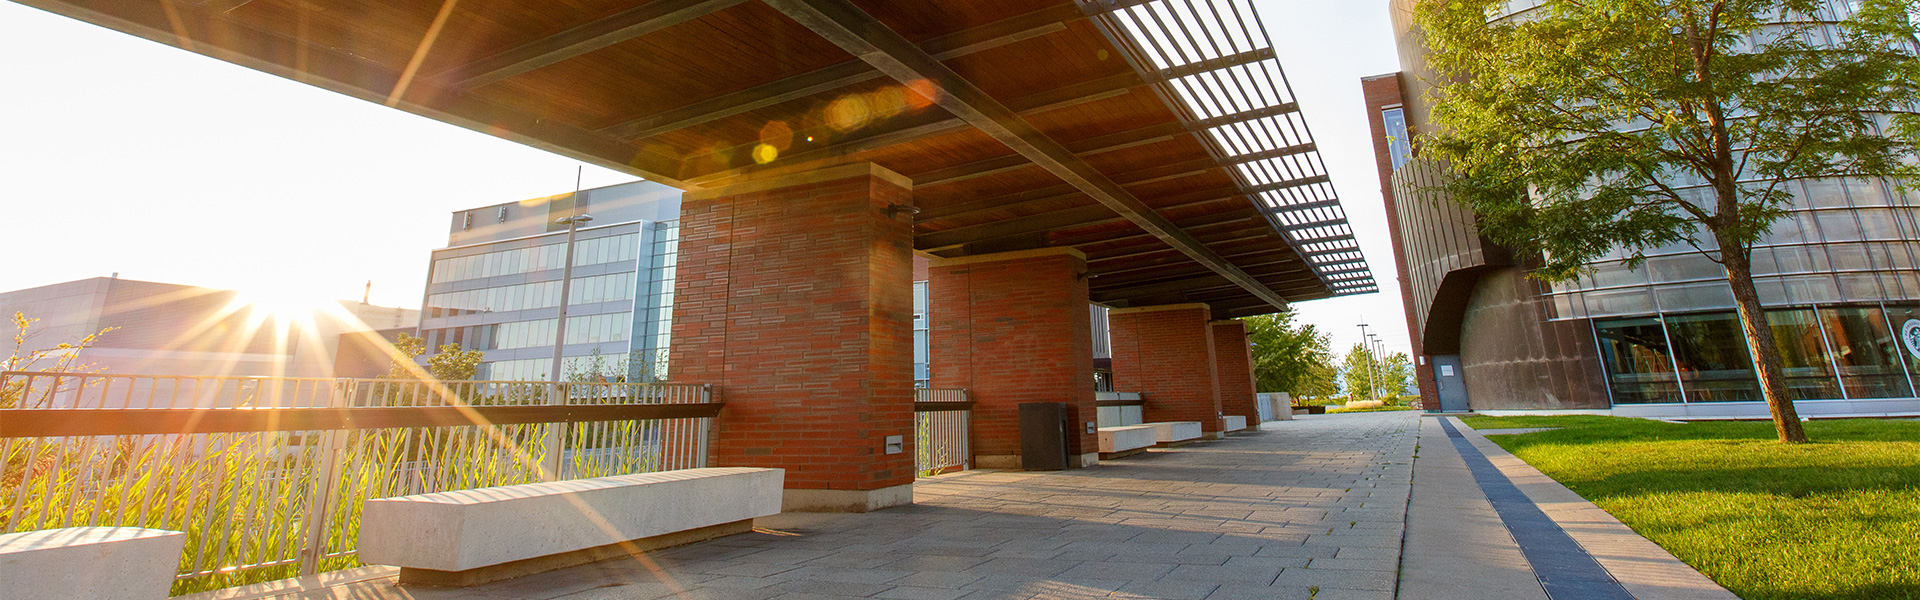 Image of the covered walkway on Polonsky Commons, facing the library.